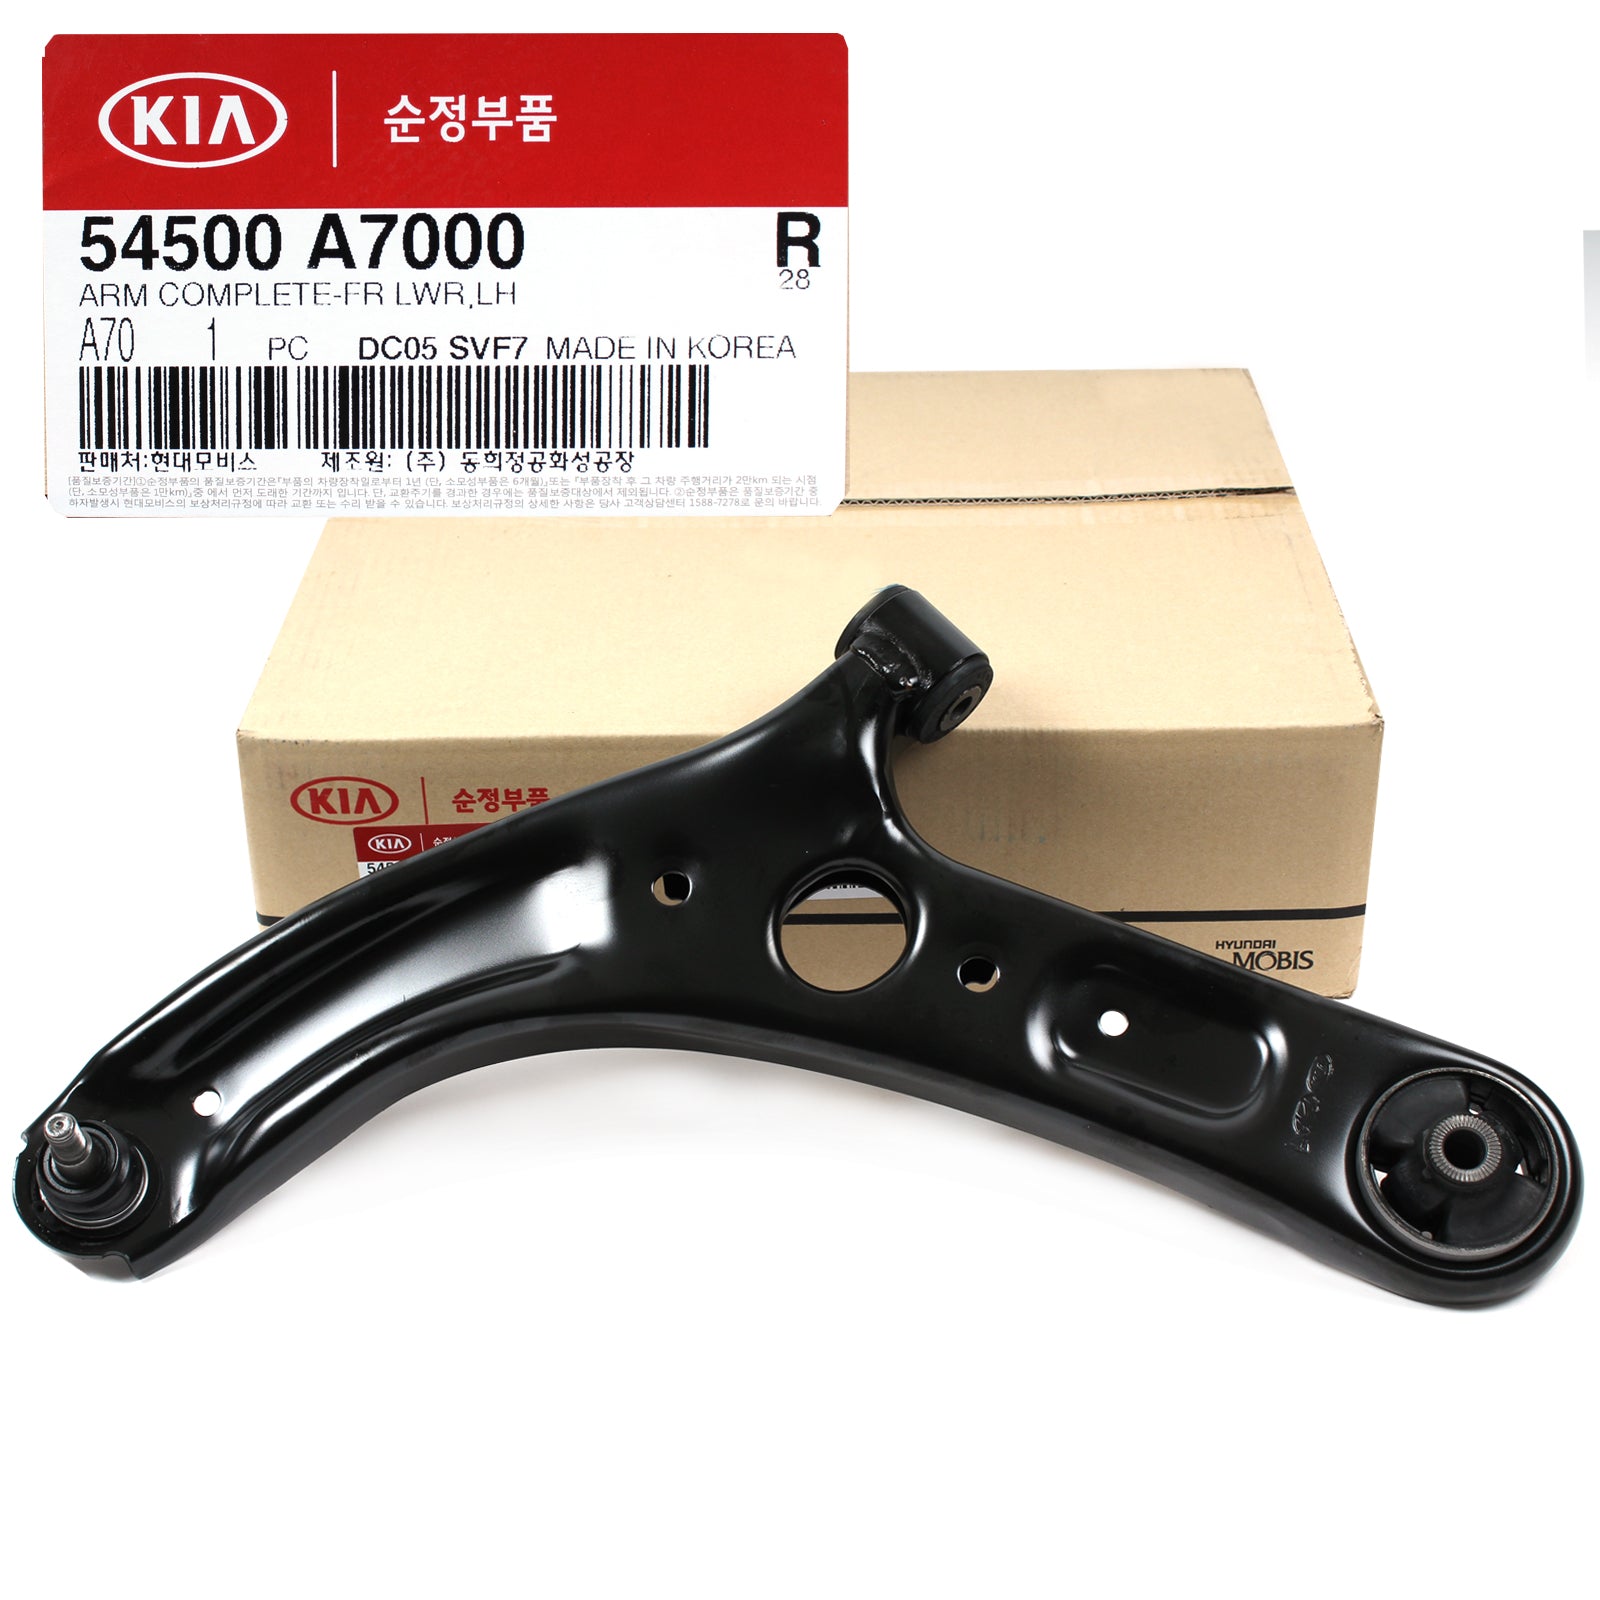 GENUINE Front Lower Control Arms LEFT & RIGHT for 2014-2018 Kia Forte & Koup